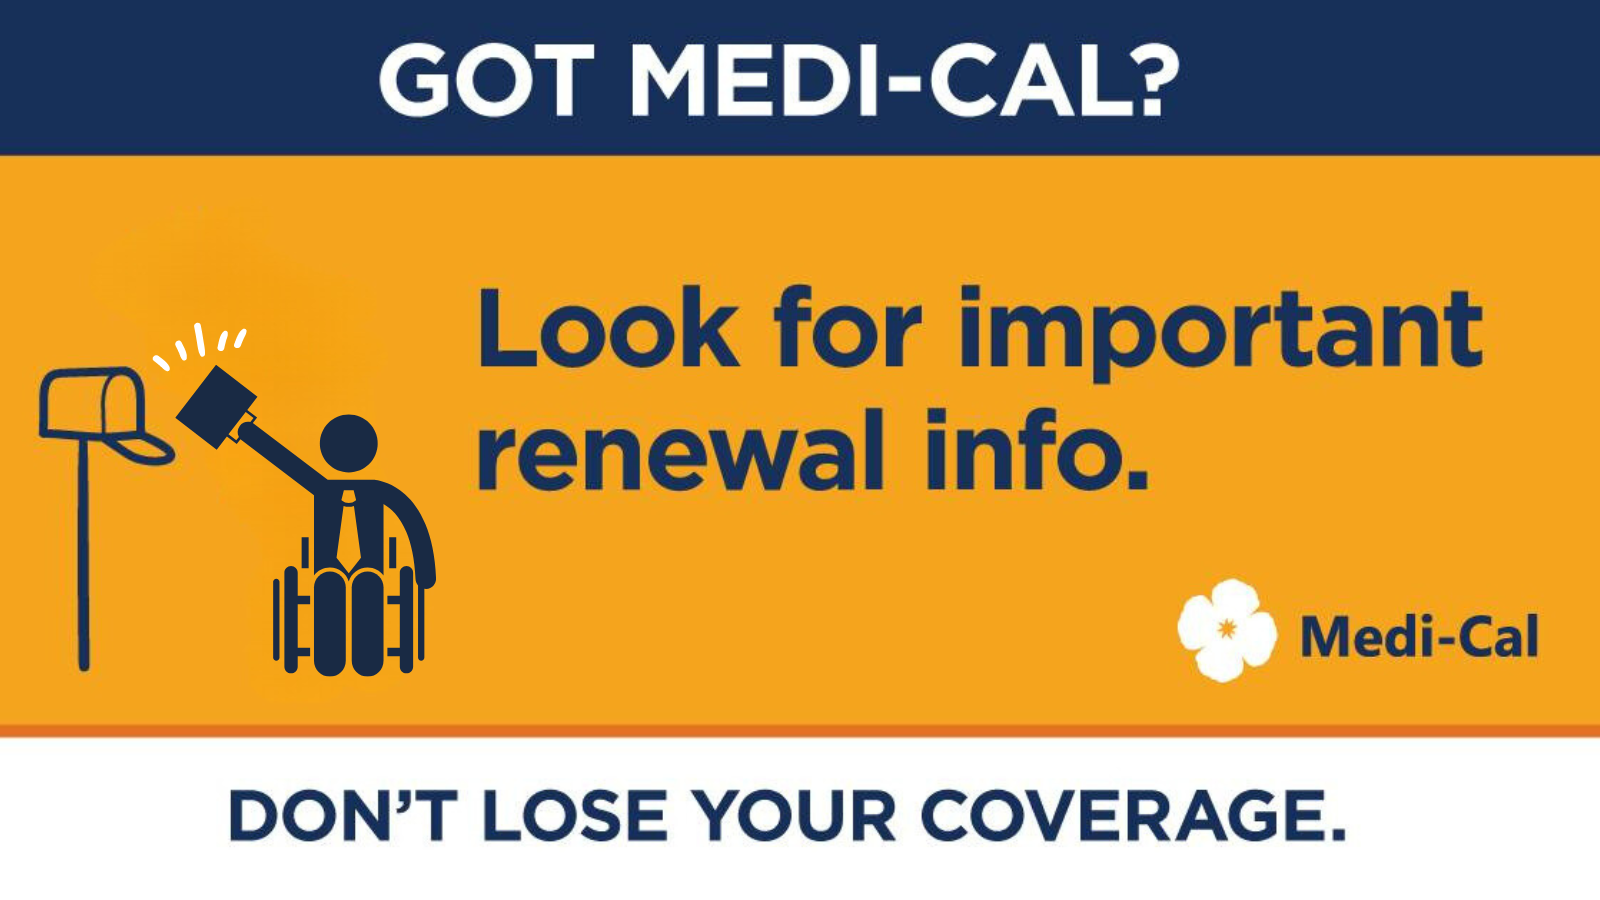 Got Medi-Cal? Look for Important renewal info. Don't Lose Your Coverage